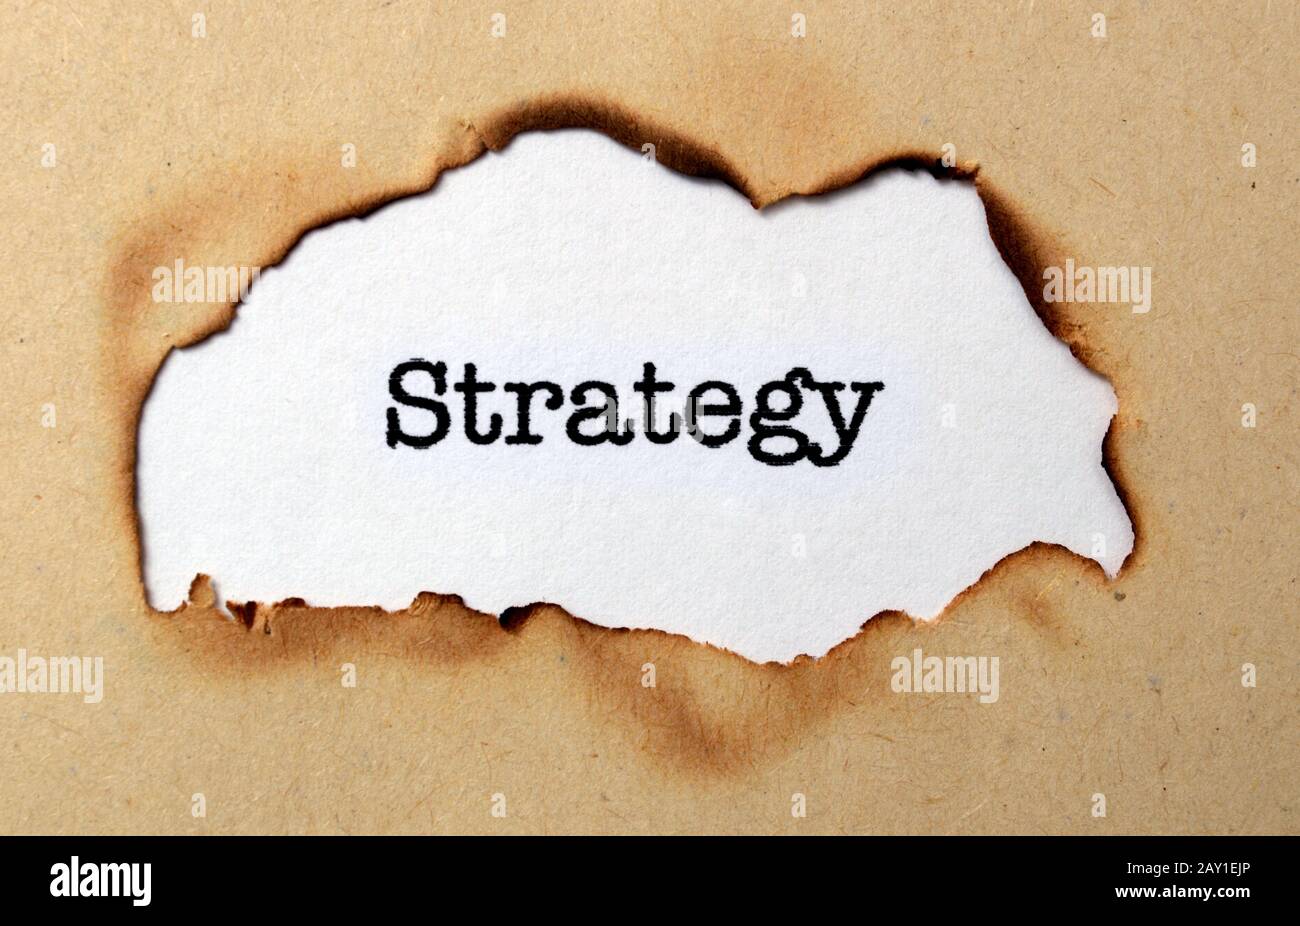 Strategy concept Stock Photo